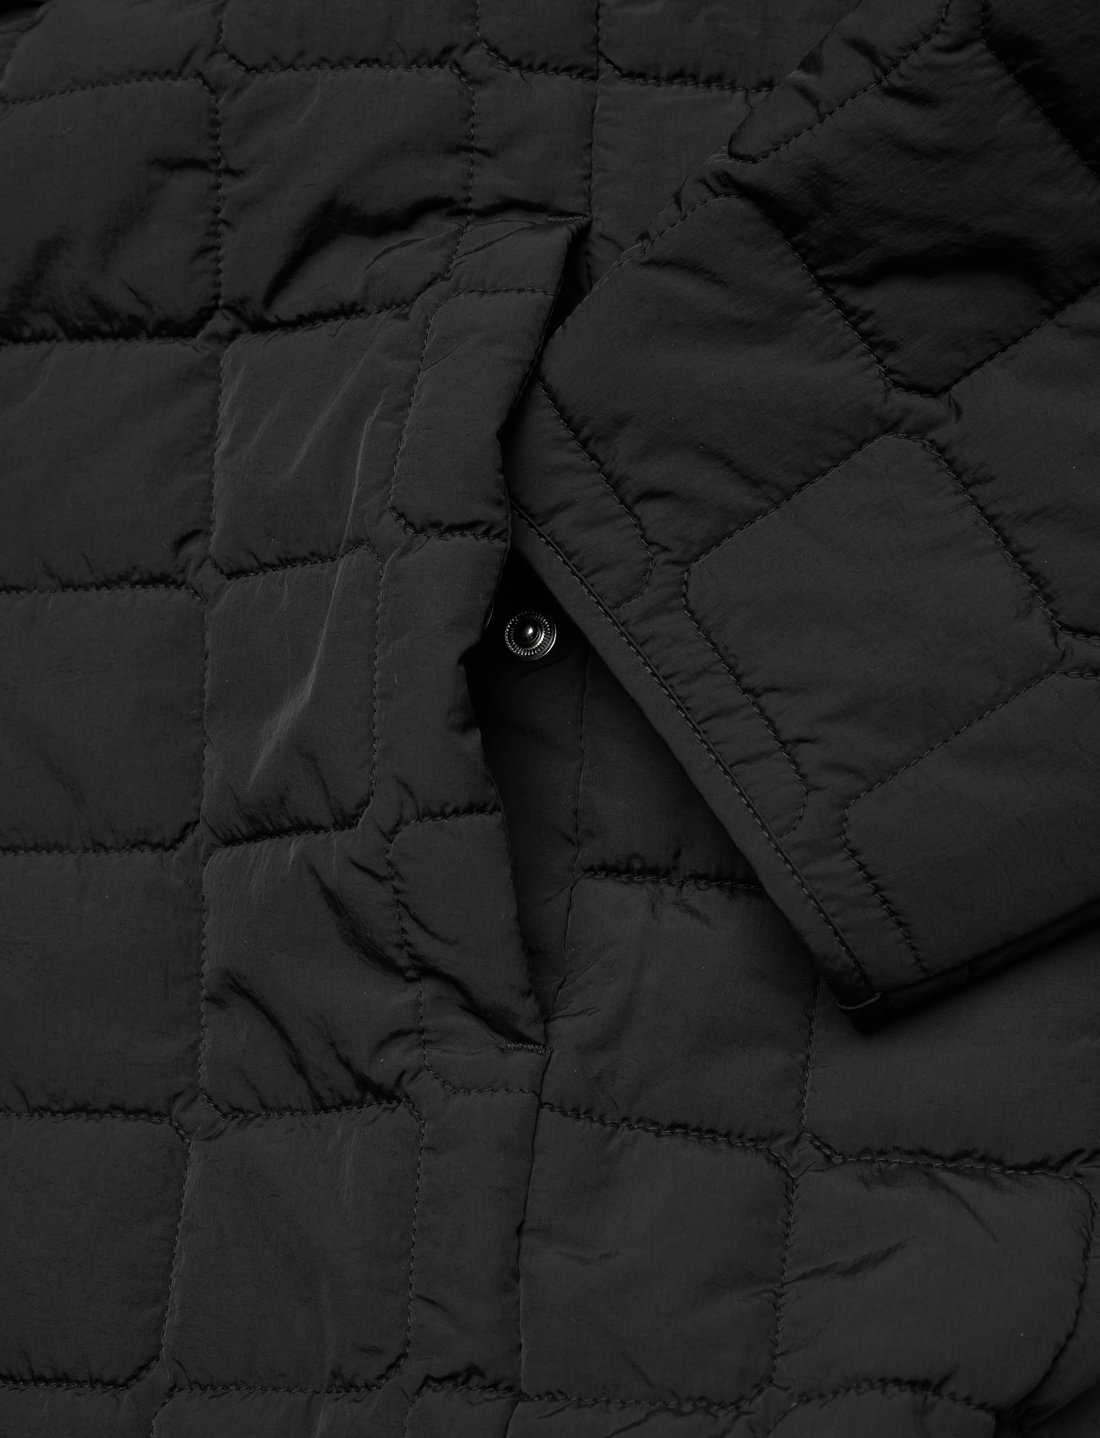 Calvin Klein Jeans Long Quilted Utility Coat - 124.95 €. Buy Quilted jackets  from Calvin Klein Jeans online at Boozt.com. Fast delivery and easy returns